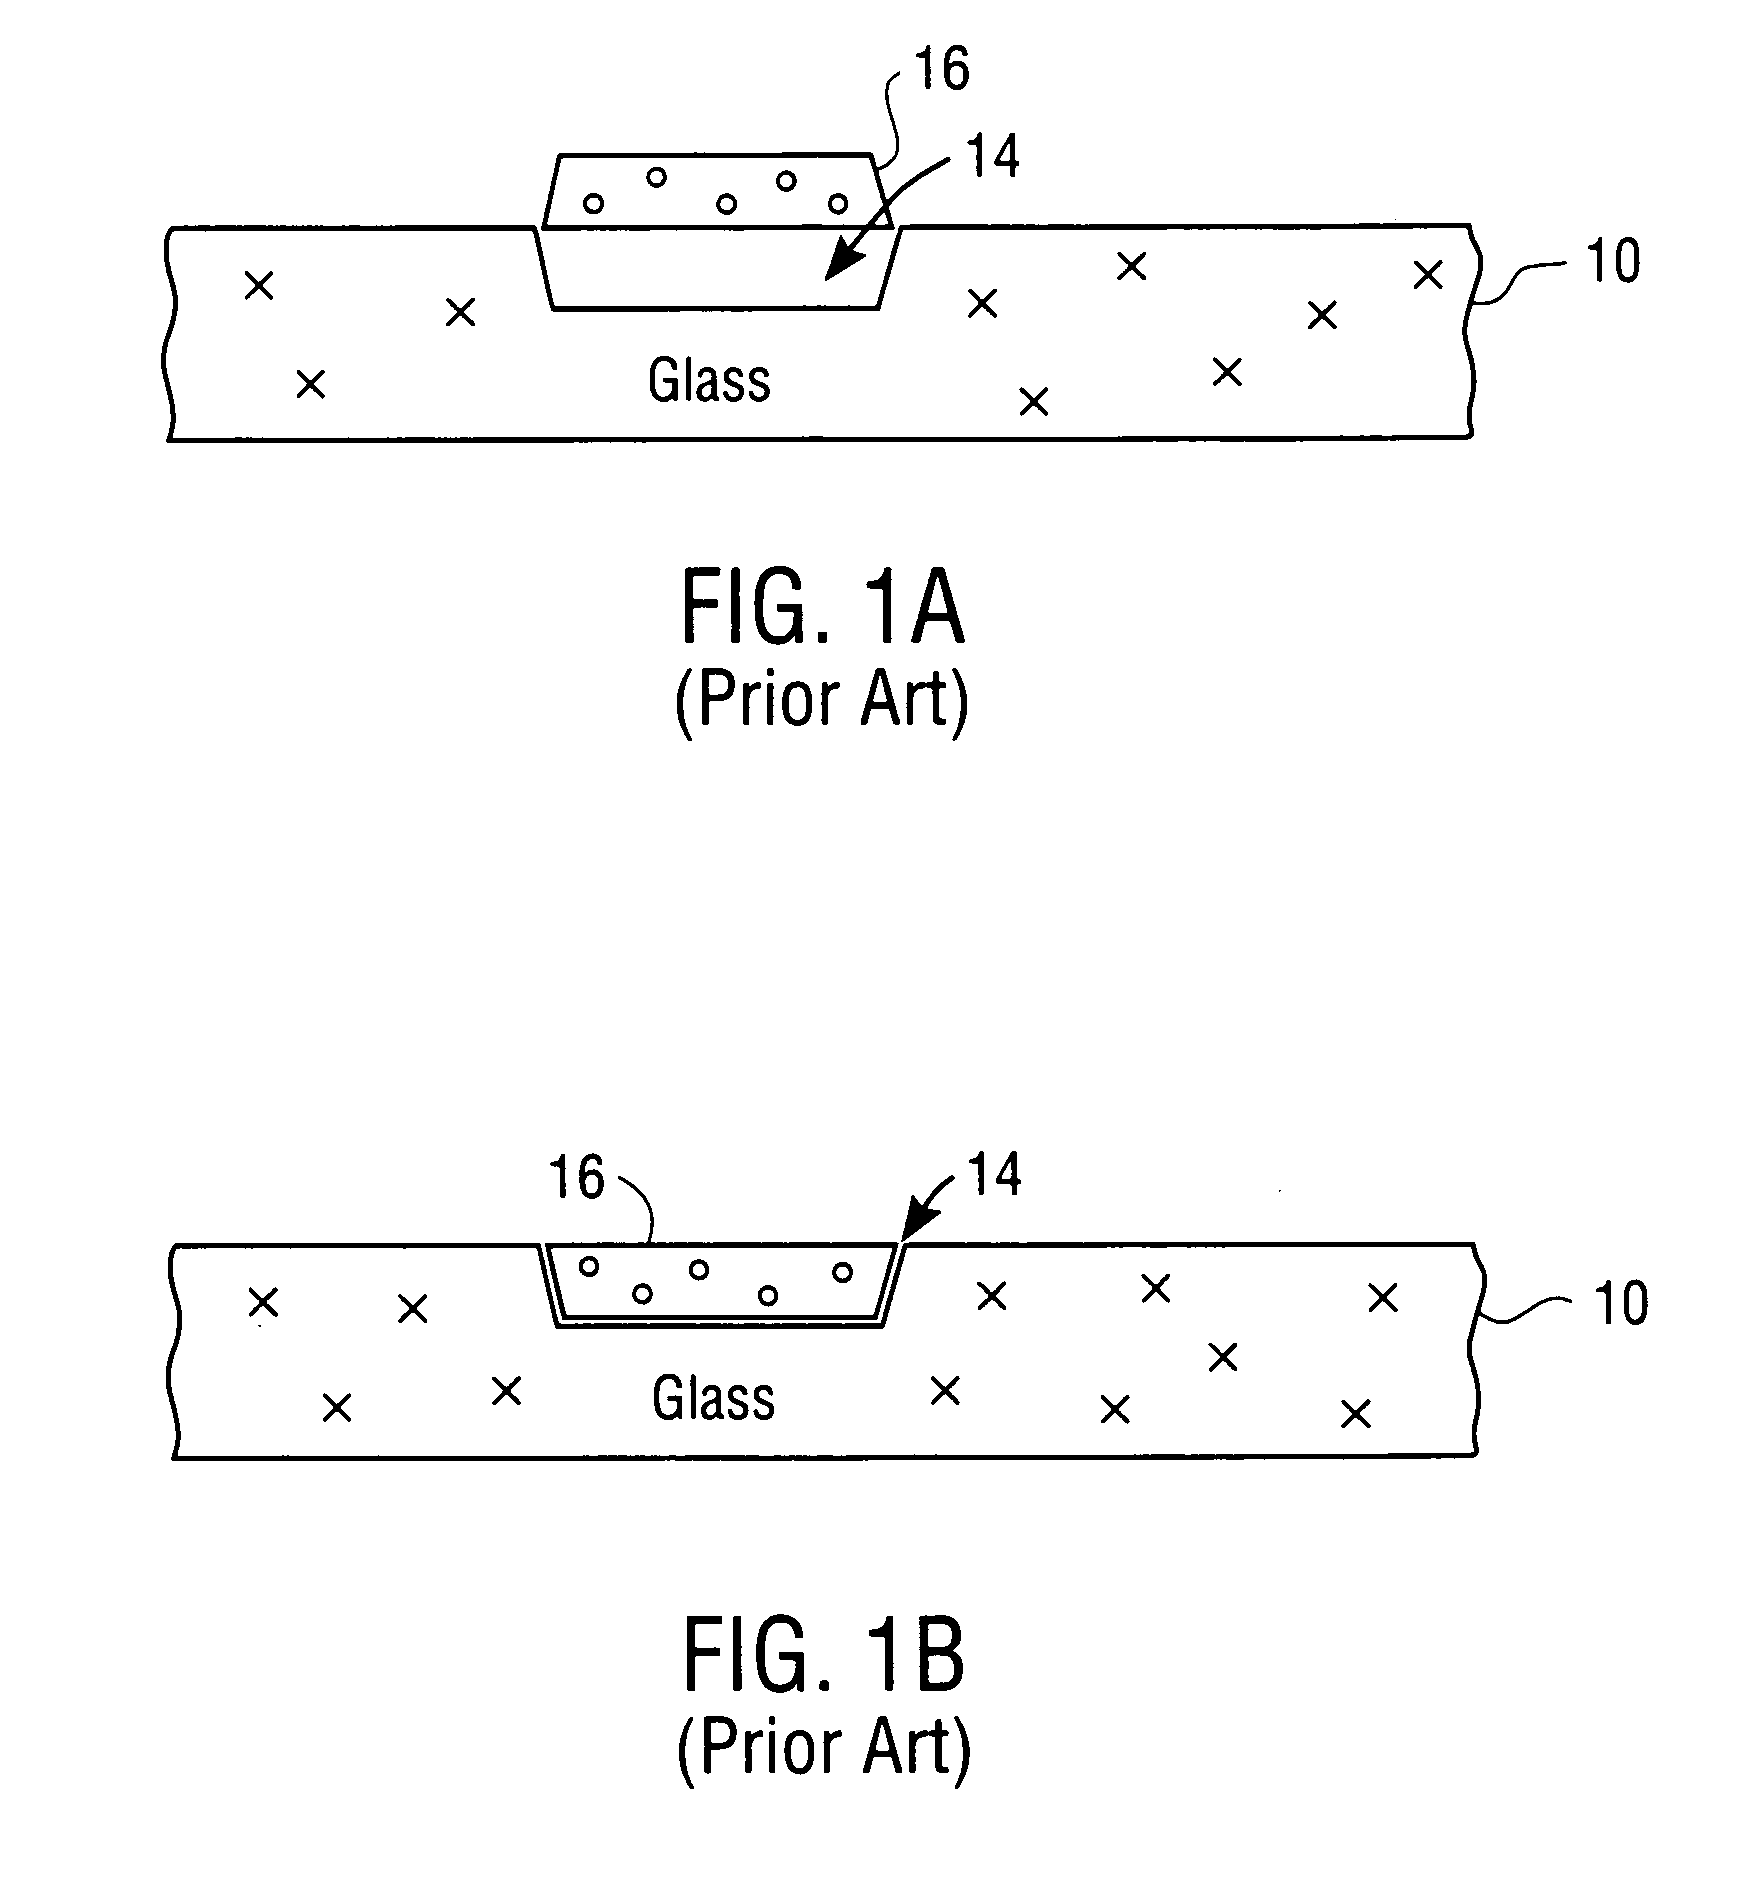 Methods and apparatuses for assembling elements onto a substrate